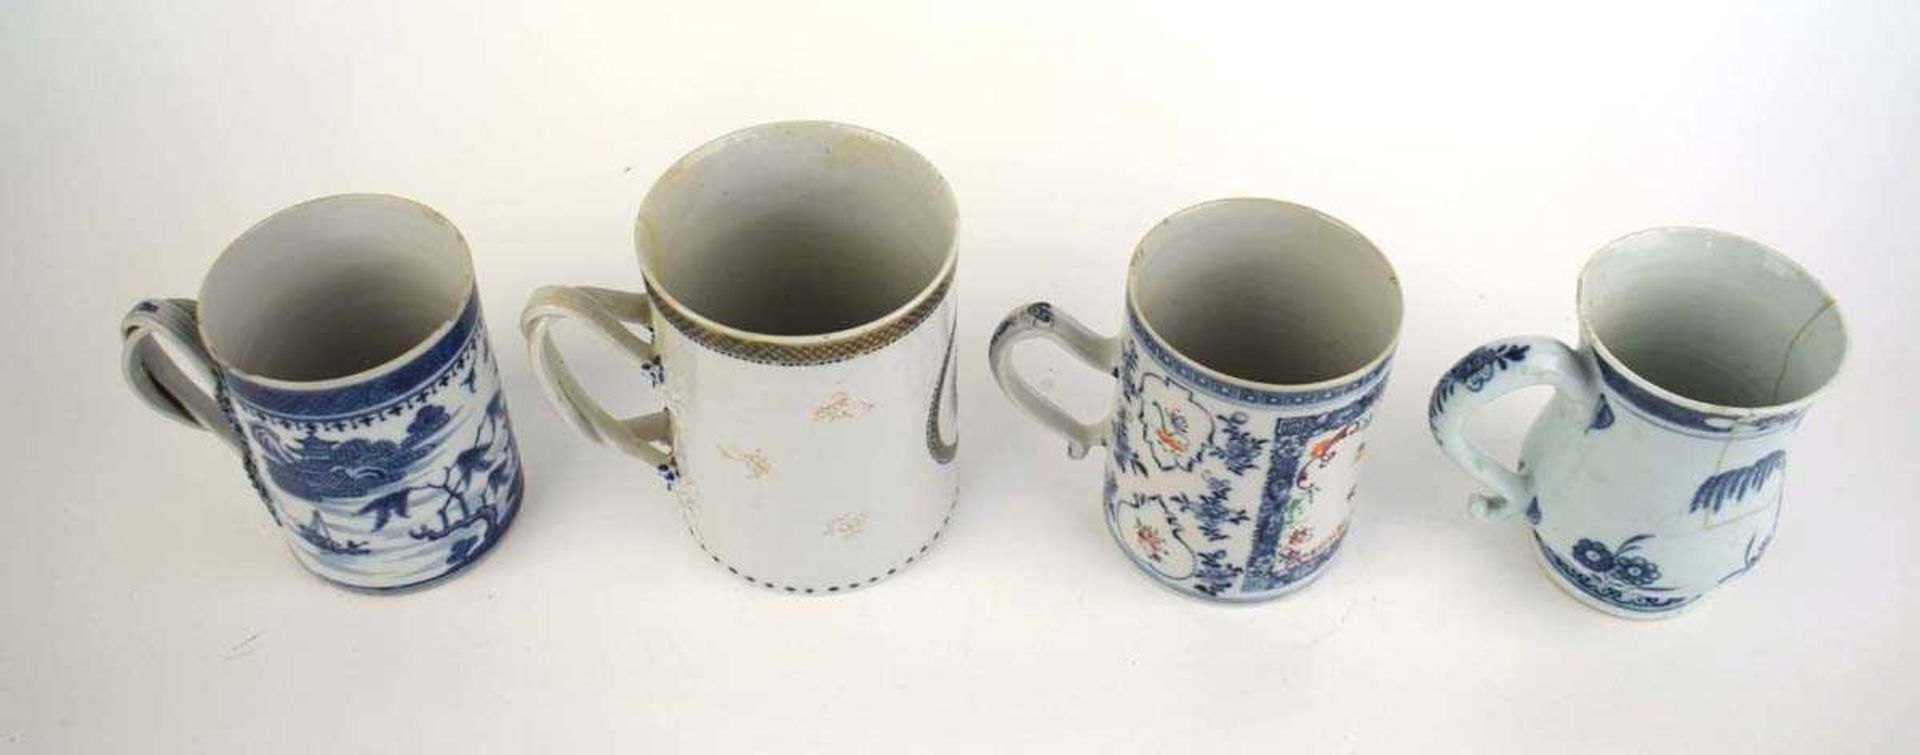 A Chinese Export blue and white tankard with entwined handle and concentric ring decoration, h. 14 - Bild 5 aus 6